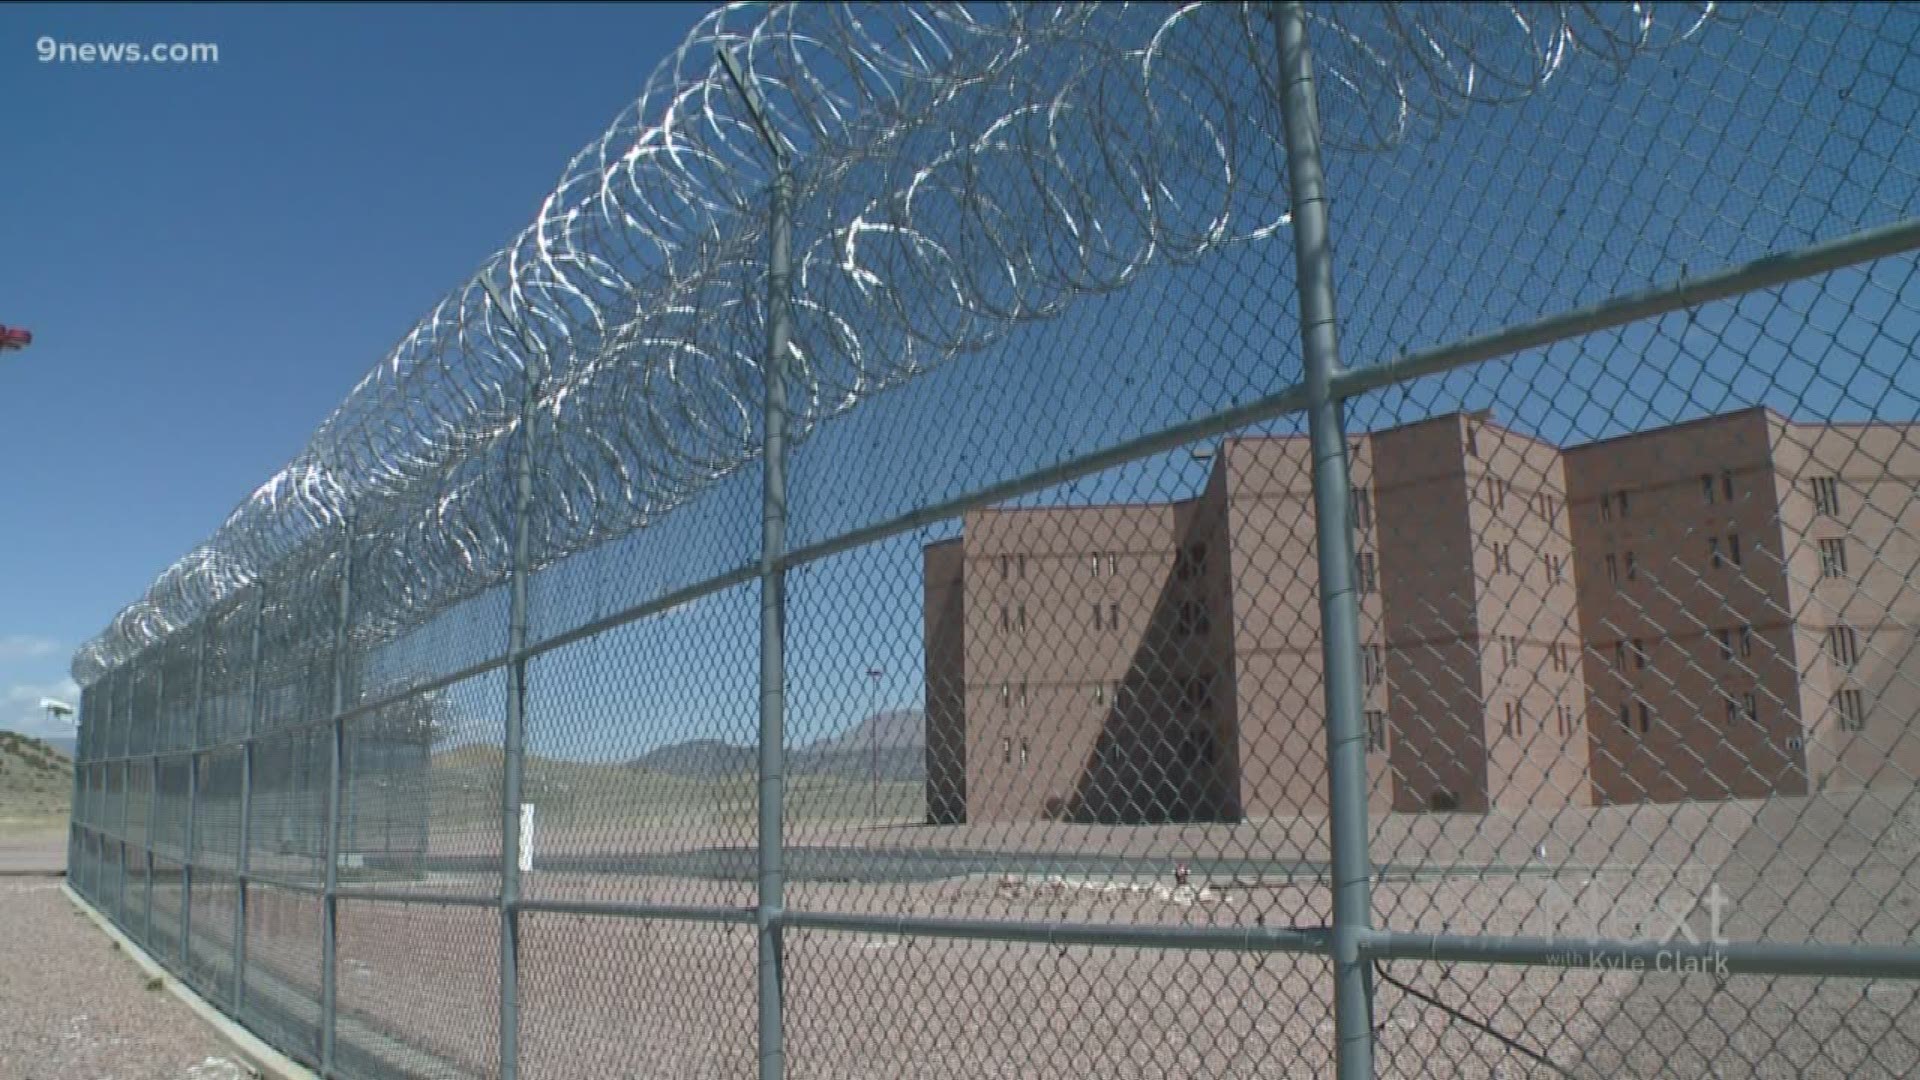 You paid for this prison in Colorado. Now it's sitting empty, and it'll cost you again if the state decides to use it.